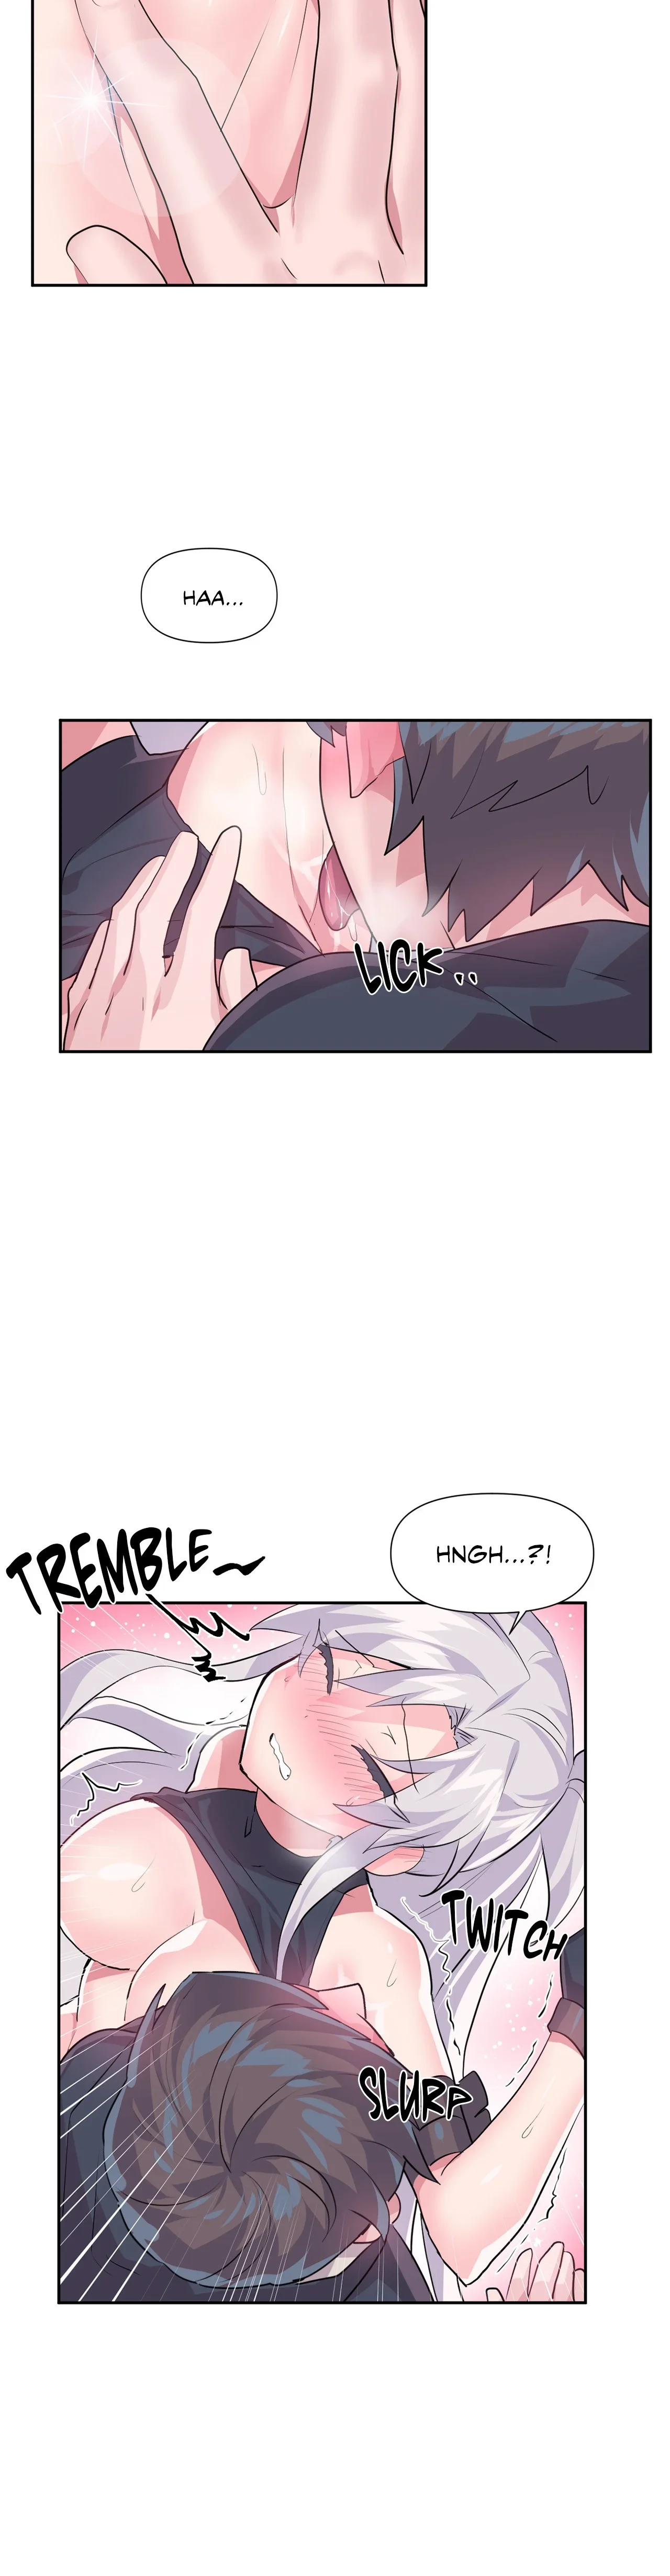 log-in-to-lust-a-land-chap-30-13